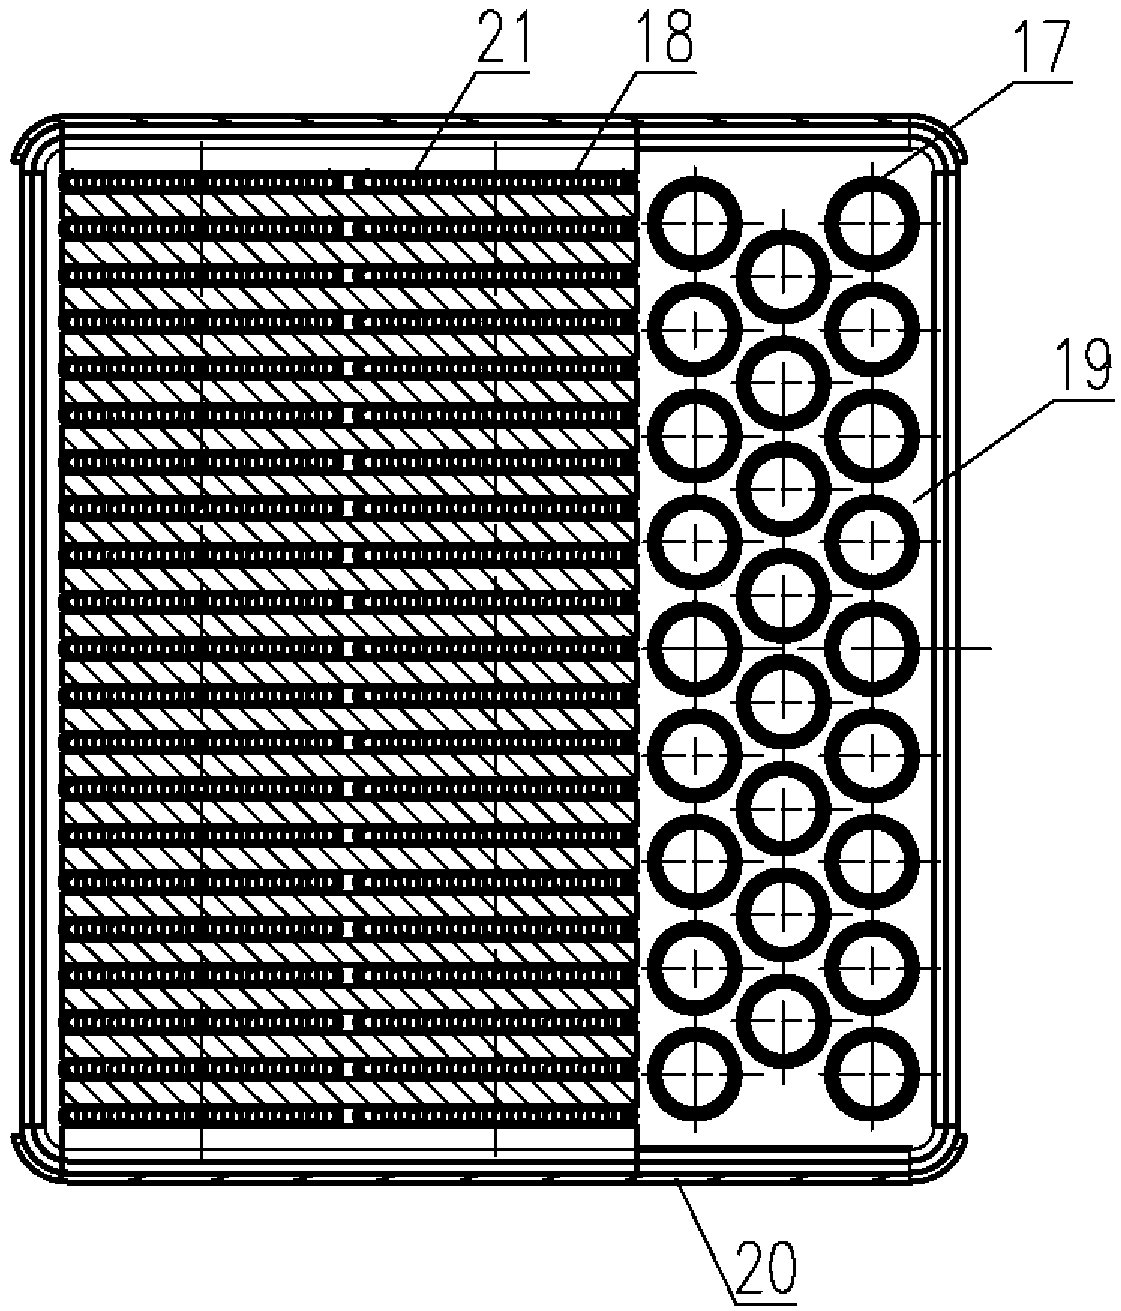 A combustion waste heat utilization heat exchange device with variable heat exchange structure spacing